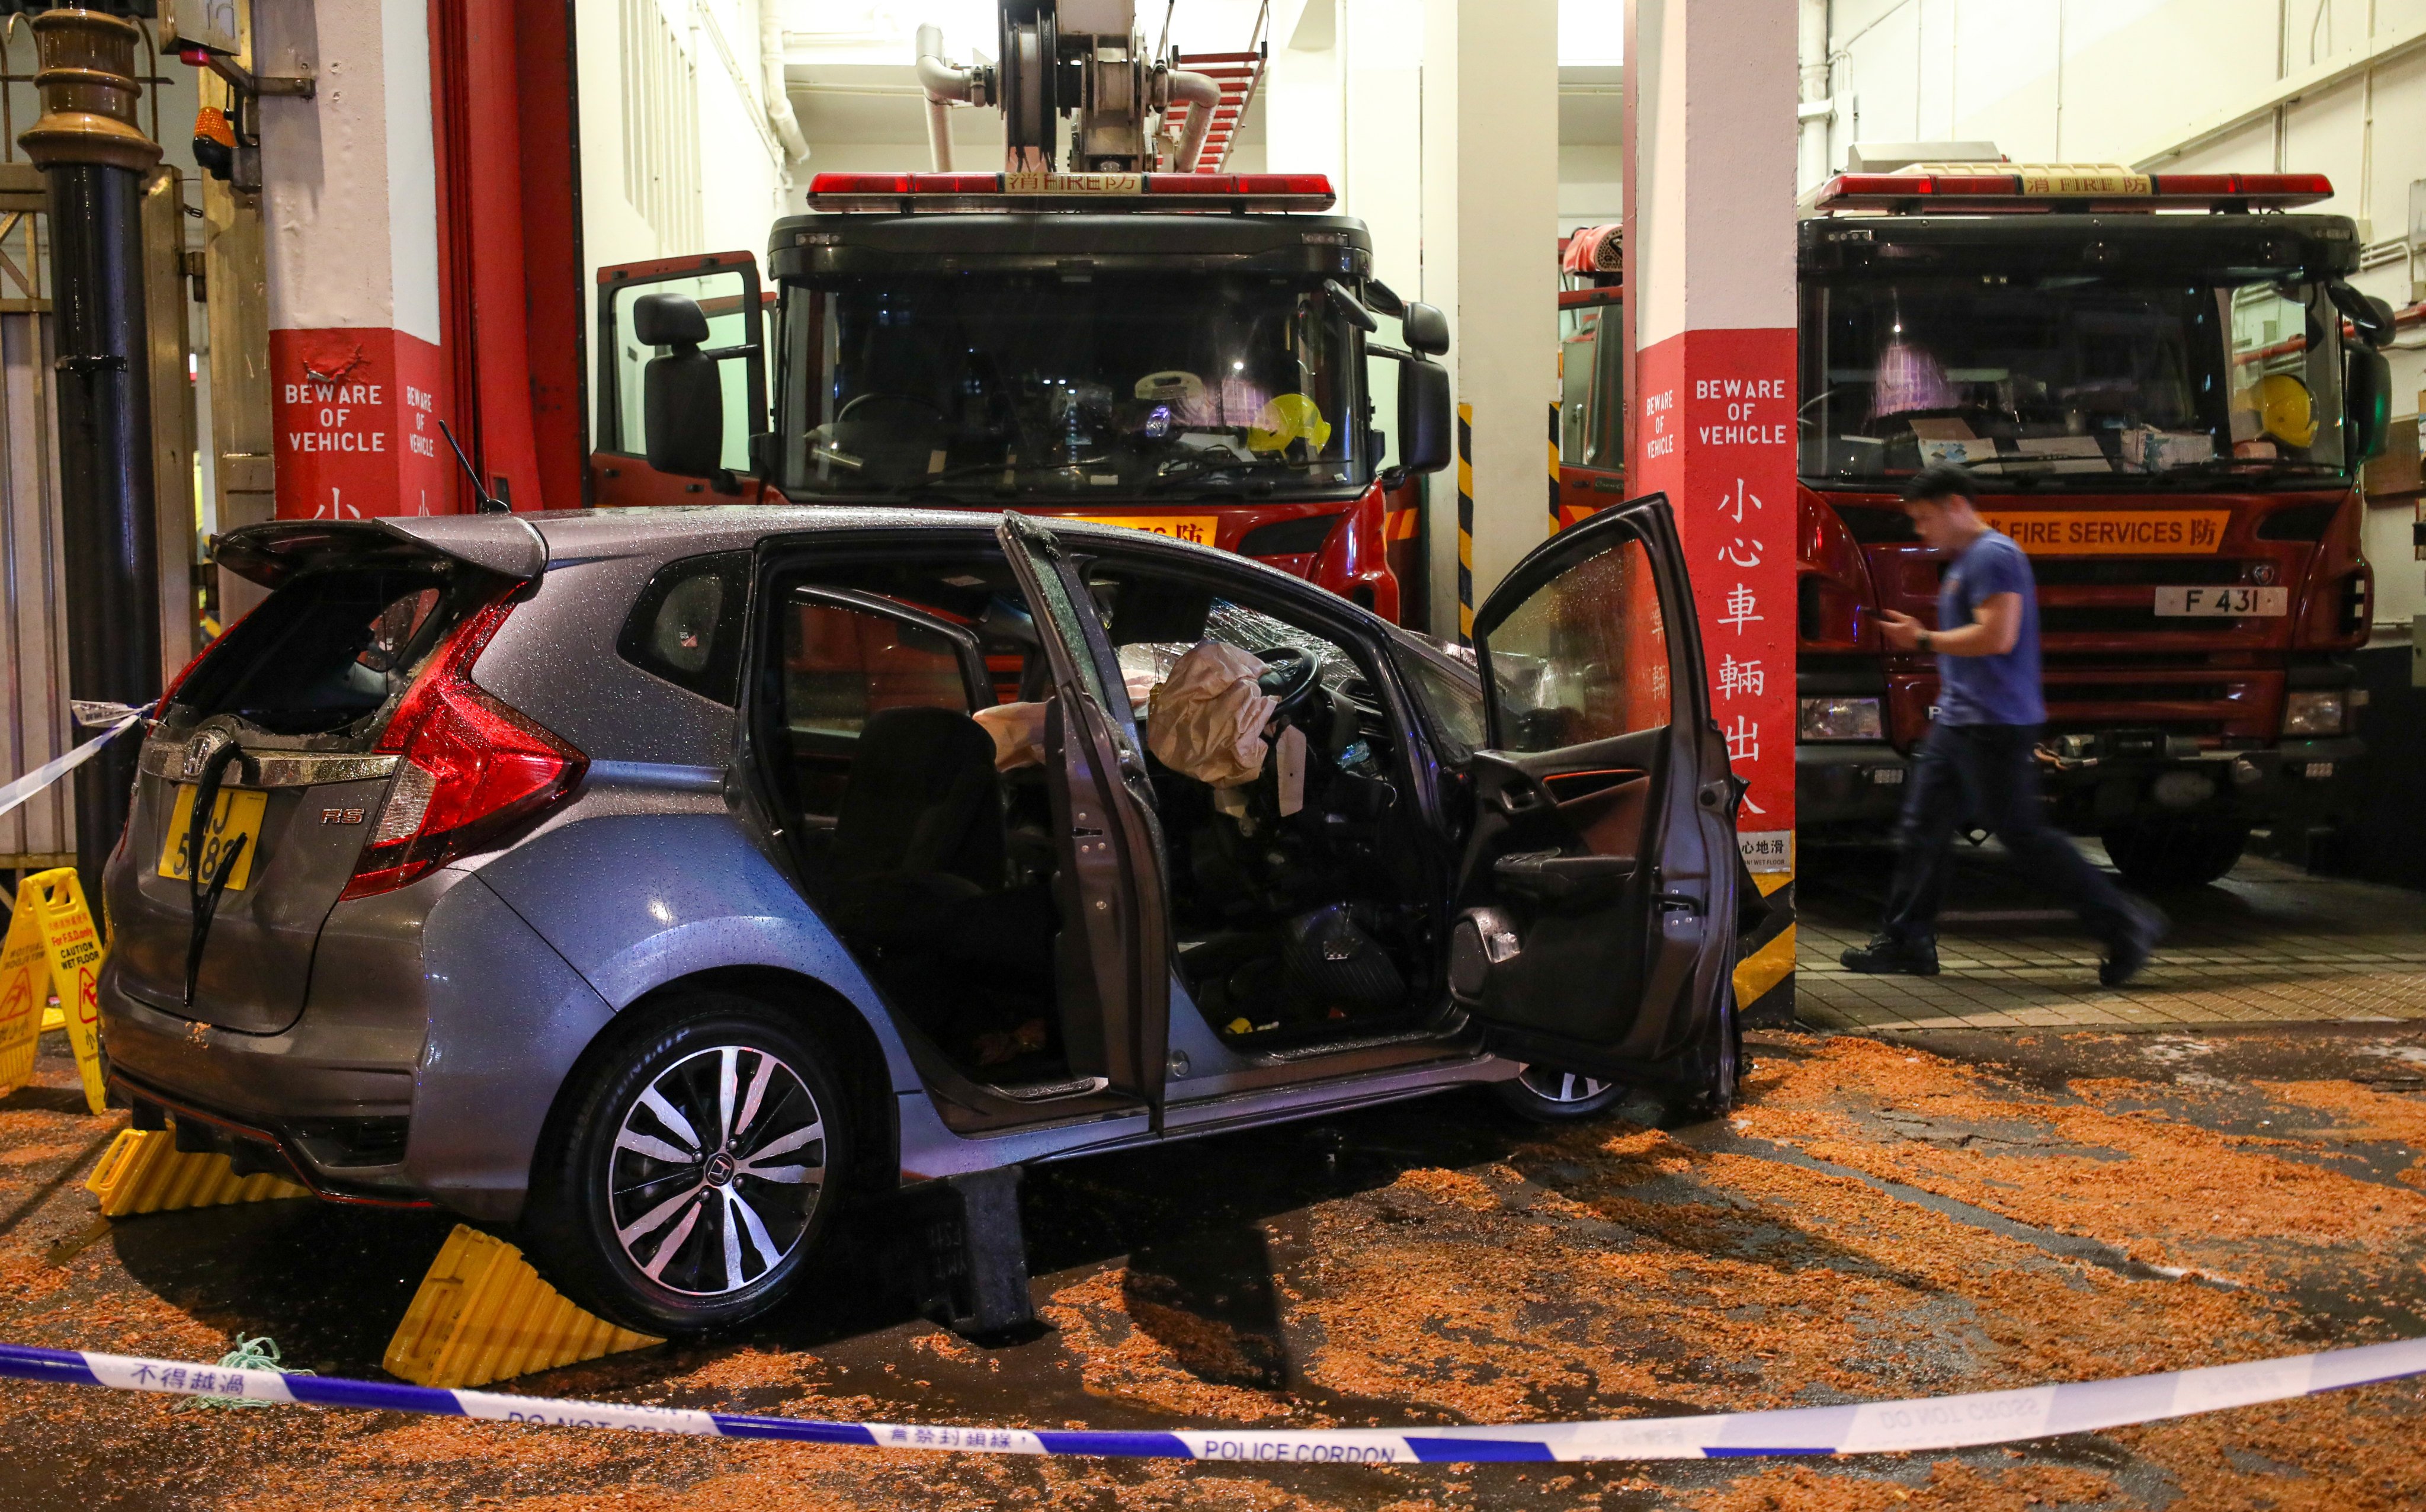 The scene of the accident at the fire station in Yau Ma Tei. Photo: Xiaomei Chen